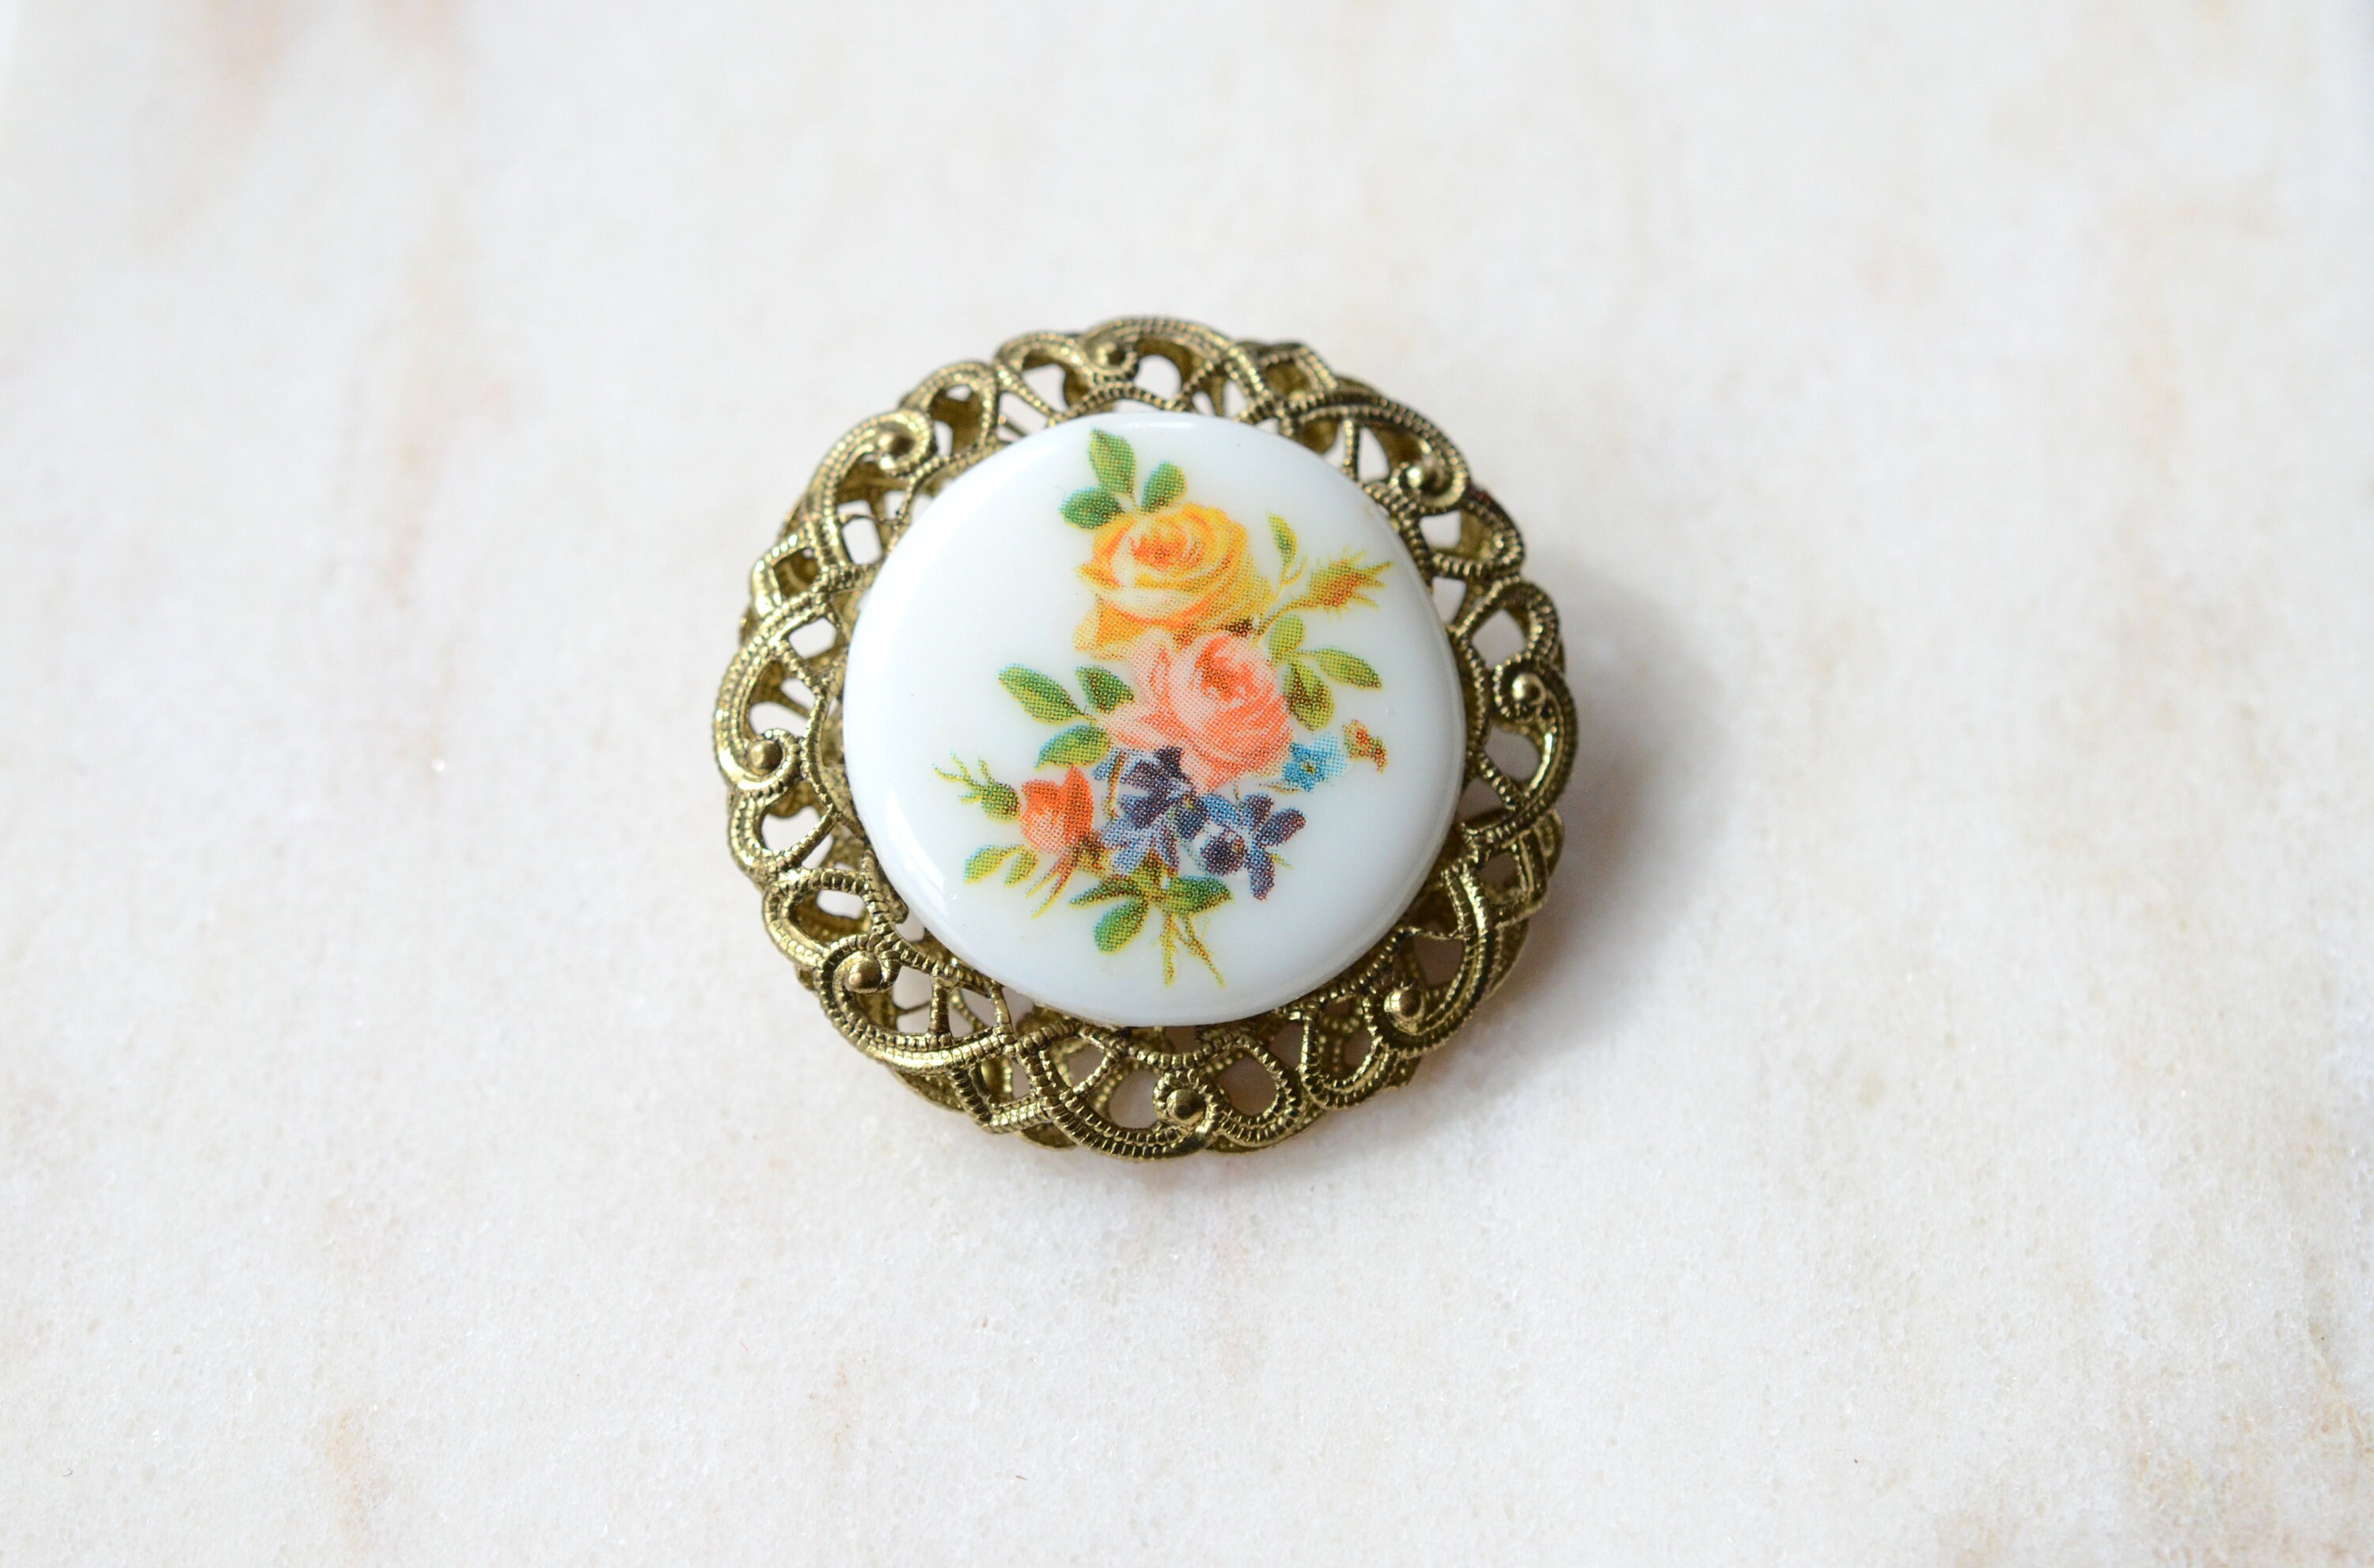 70s/80s Floral Circle Brooch